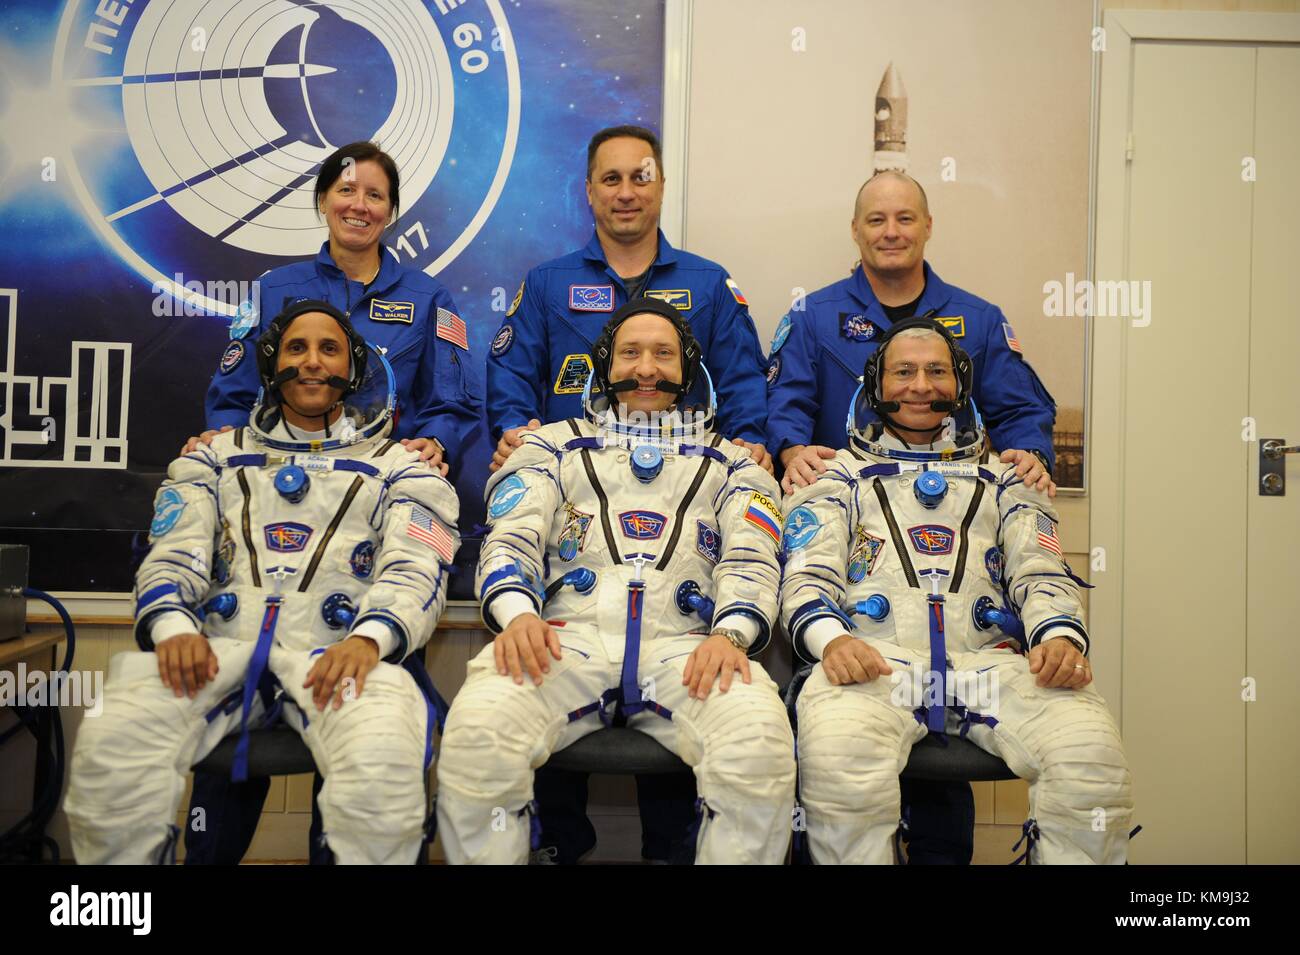 NASA International Space Station Expedition 53-54 prime and backup crew members (front, L-R) American astronaut Joe Acaba, Russian cosmonaut Alexander Misurkin of Roscosmos, American astronaut Mark Vande Hei, (back, L-R) American astronaut Shannon Walker, Russian cosmonaut Anton Shkaplerov of Roscosmos, and American astronaut Scott Tingle pose for a group photo during pre-launch training before their launch aboard the Soyuz MS-06 spacecraft at the Baikonur Cosmodrome Integration Facility August 28, 2017 in Baikonur, Kazakhstan.  (photo by Irina Peshkova  via Planetpix) Stock Photo